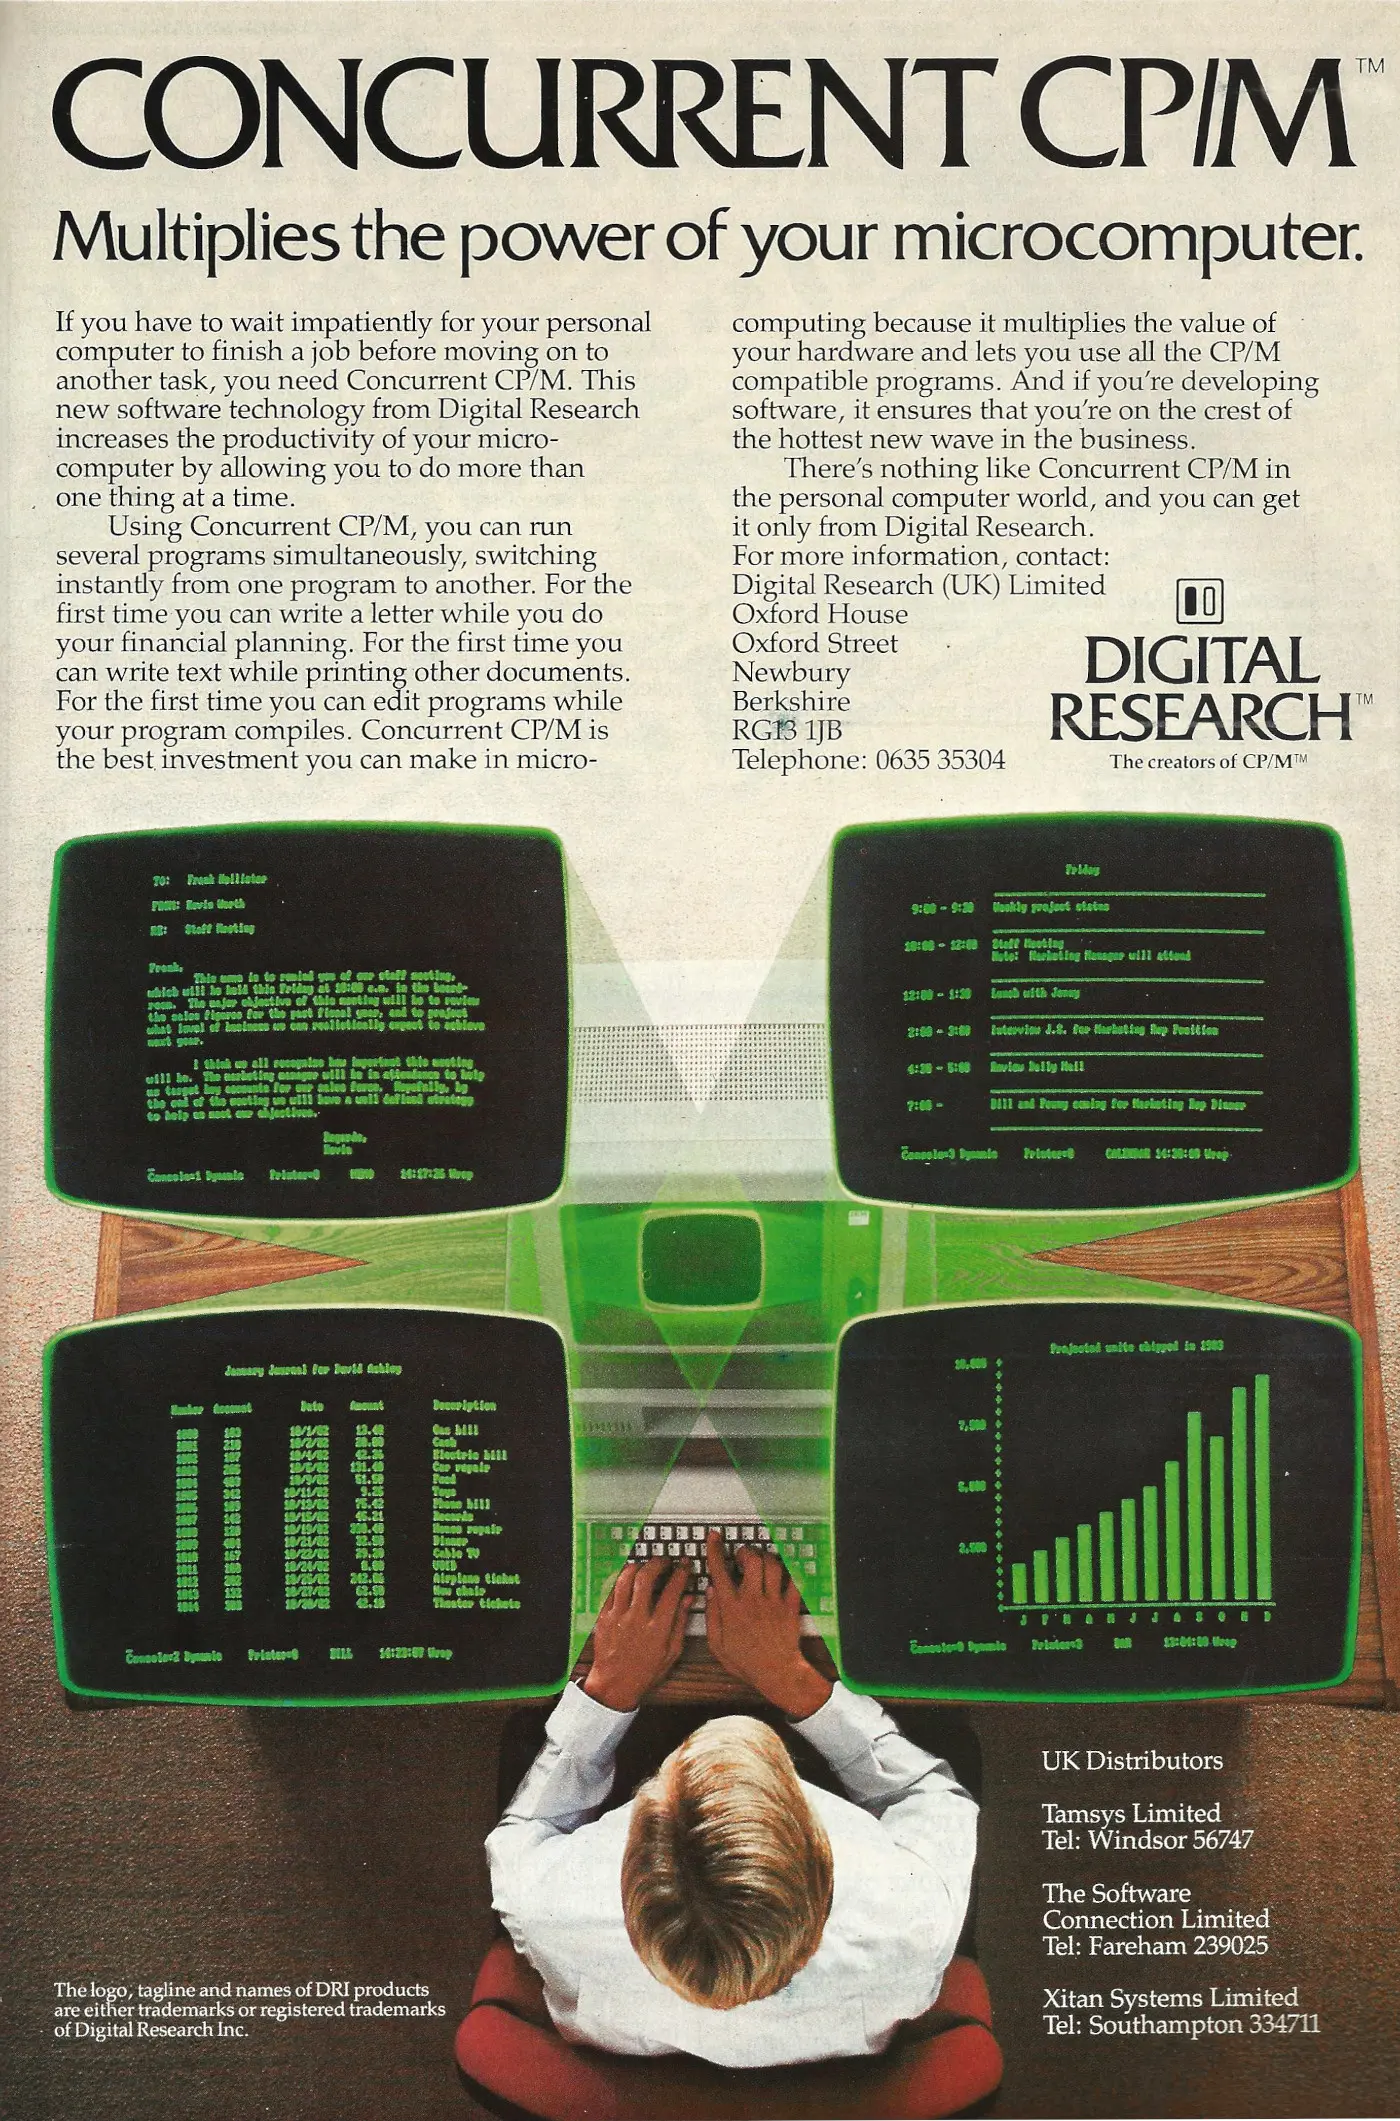 Digital Research Advert: Concurrent CP/M - Multiplies the power of your microcomputer, from Personal Computer World, March 1983